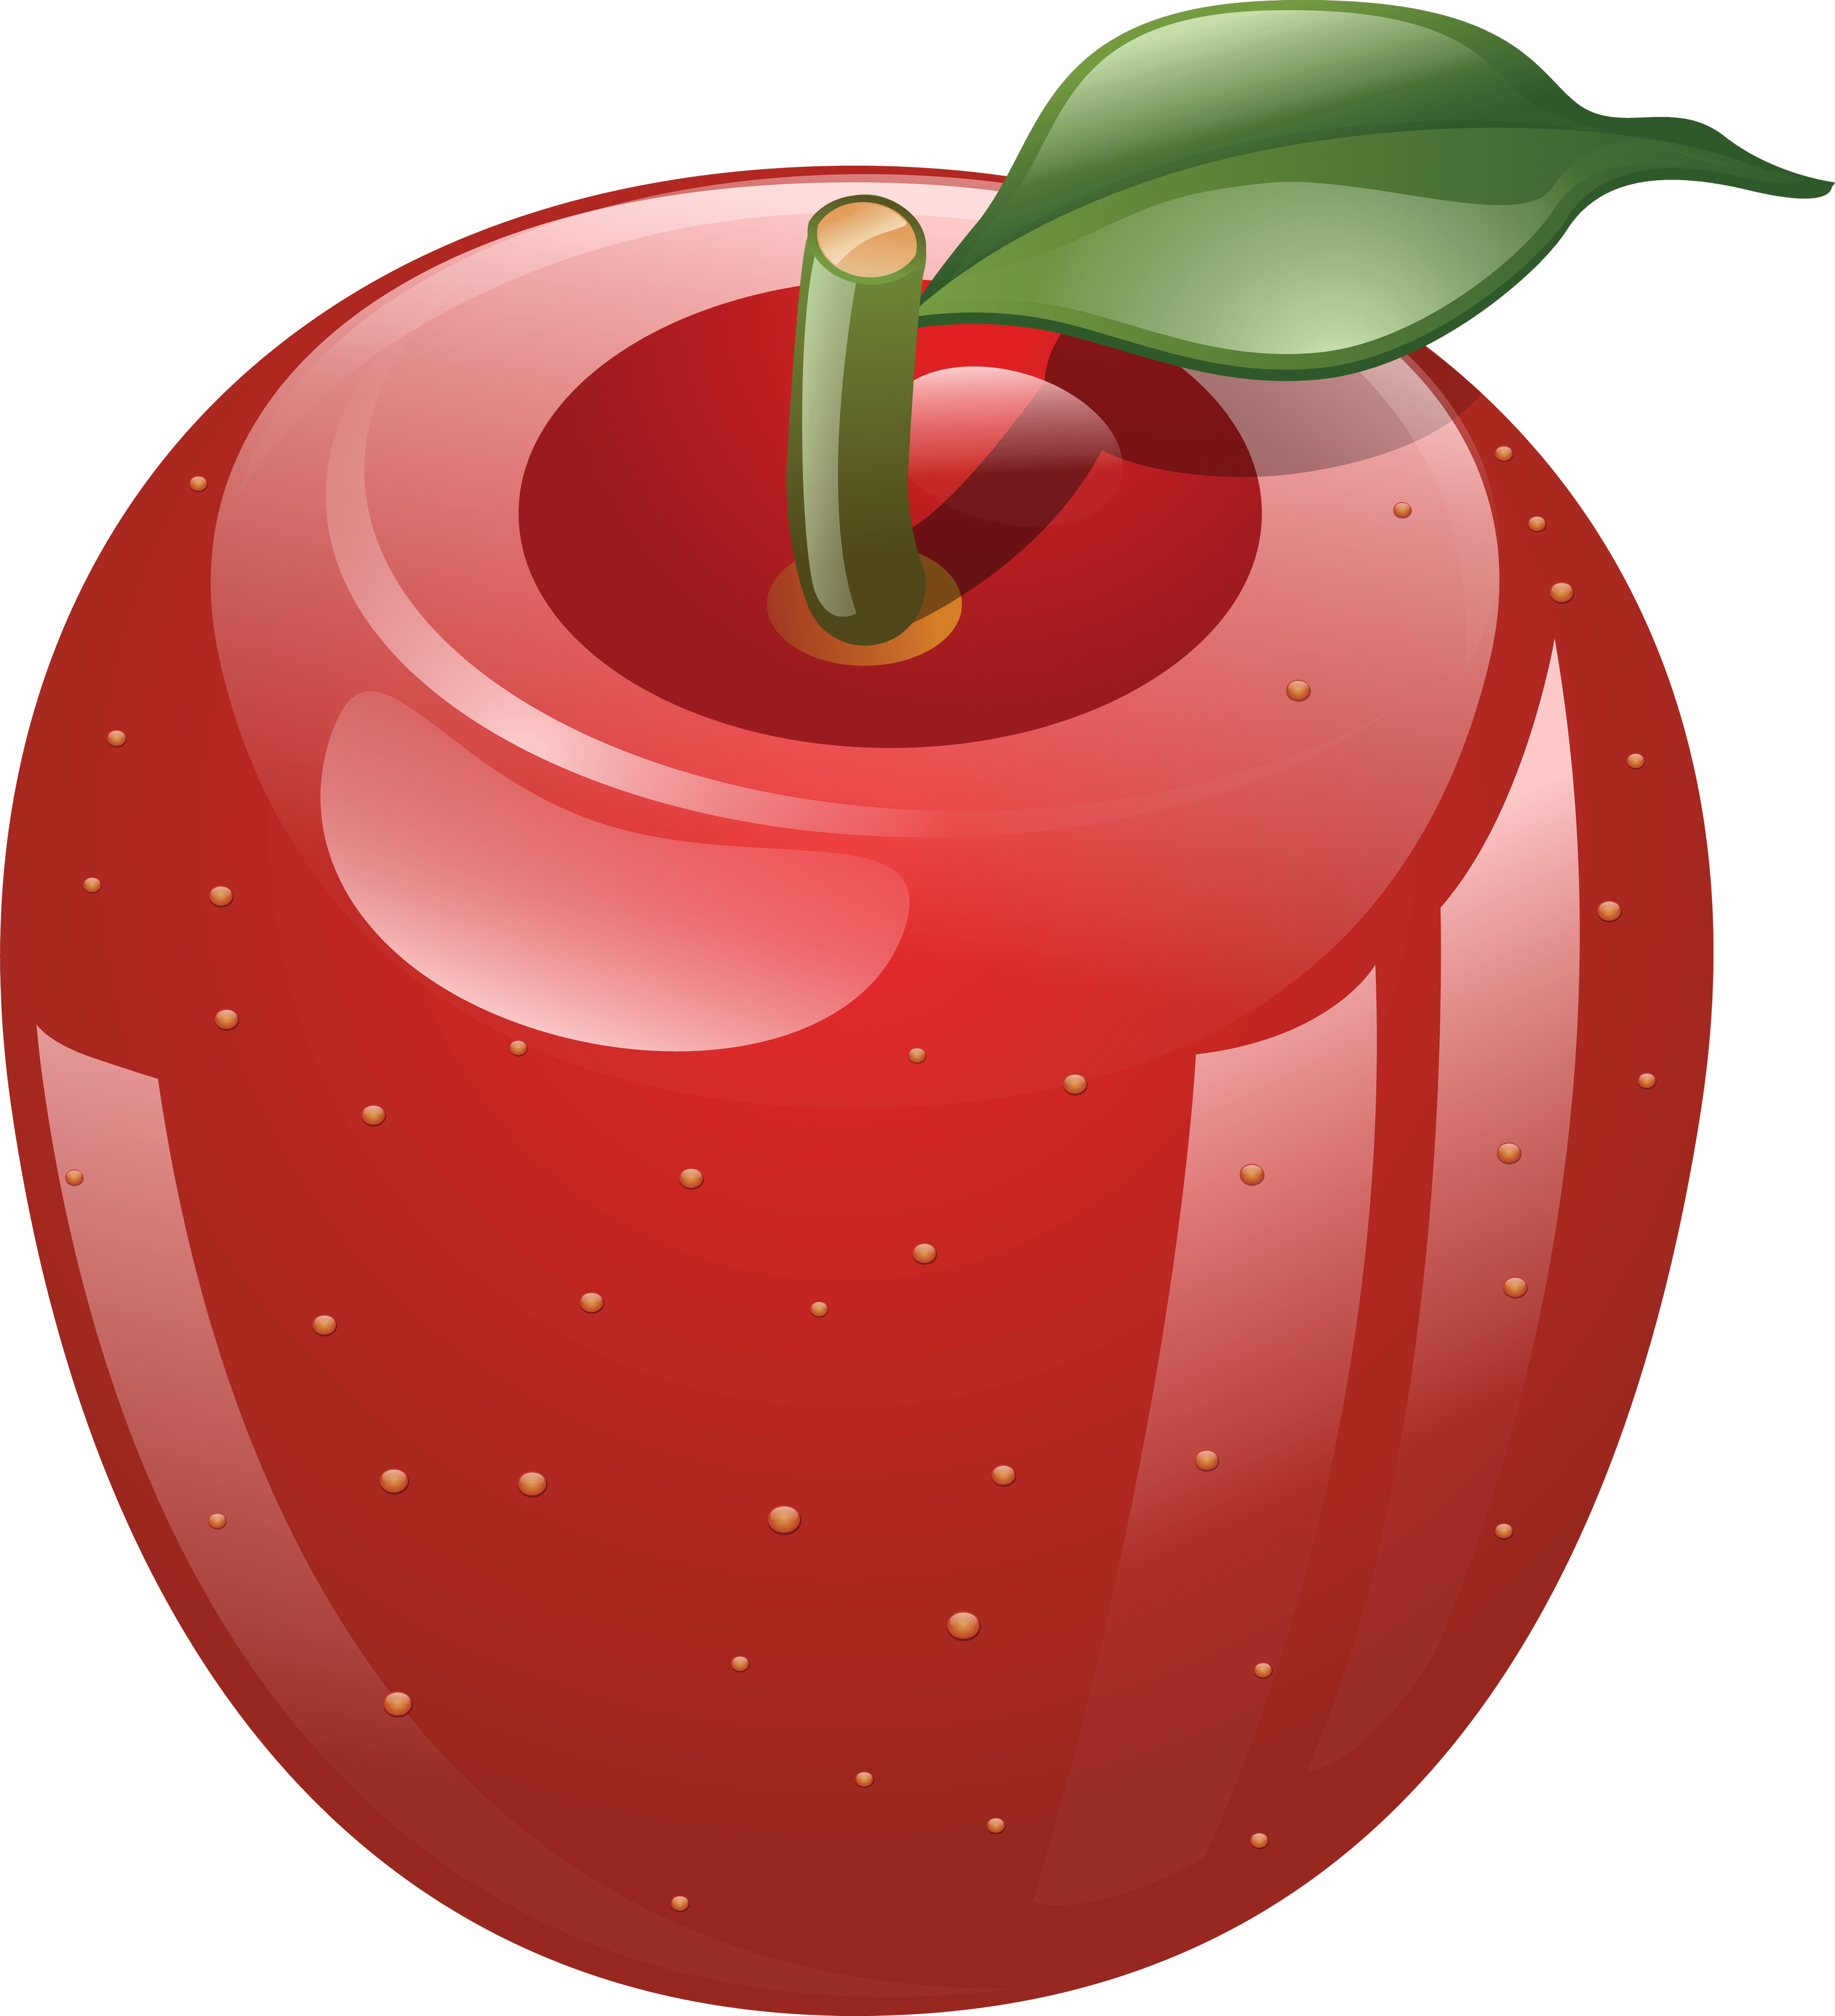 66 red apple png image